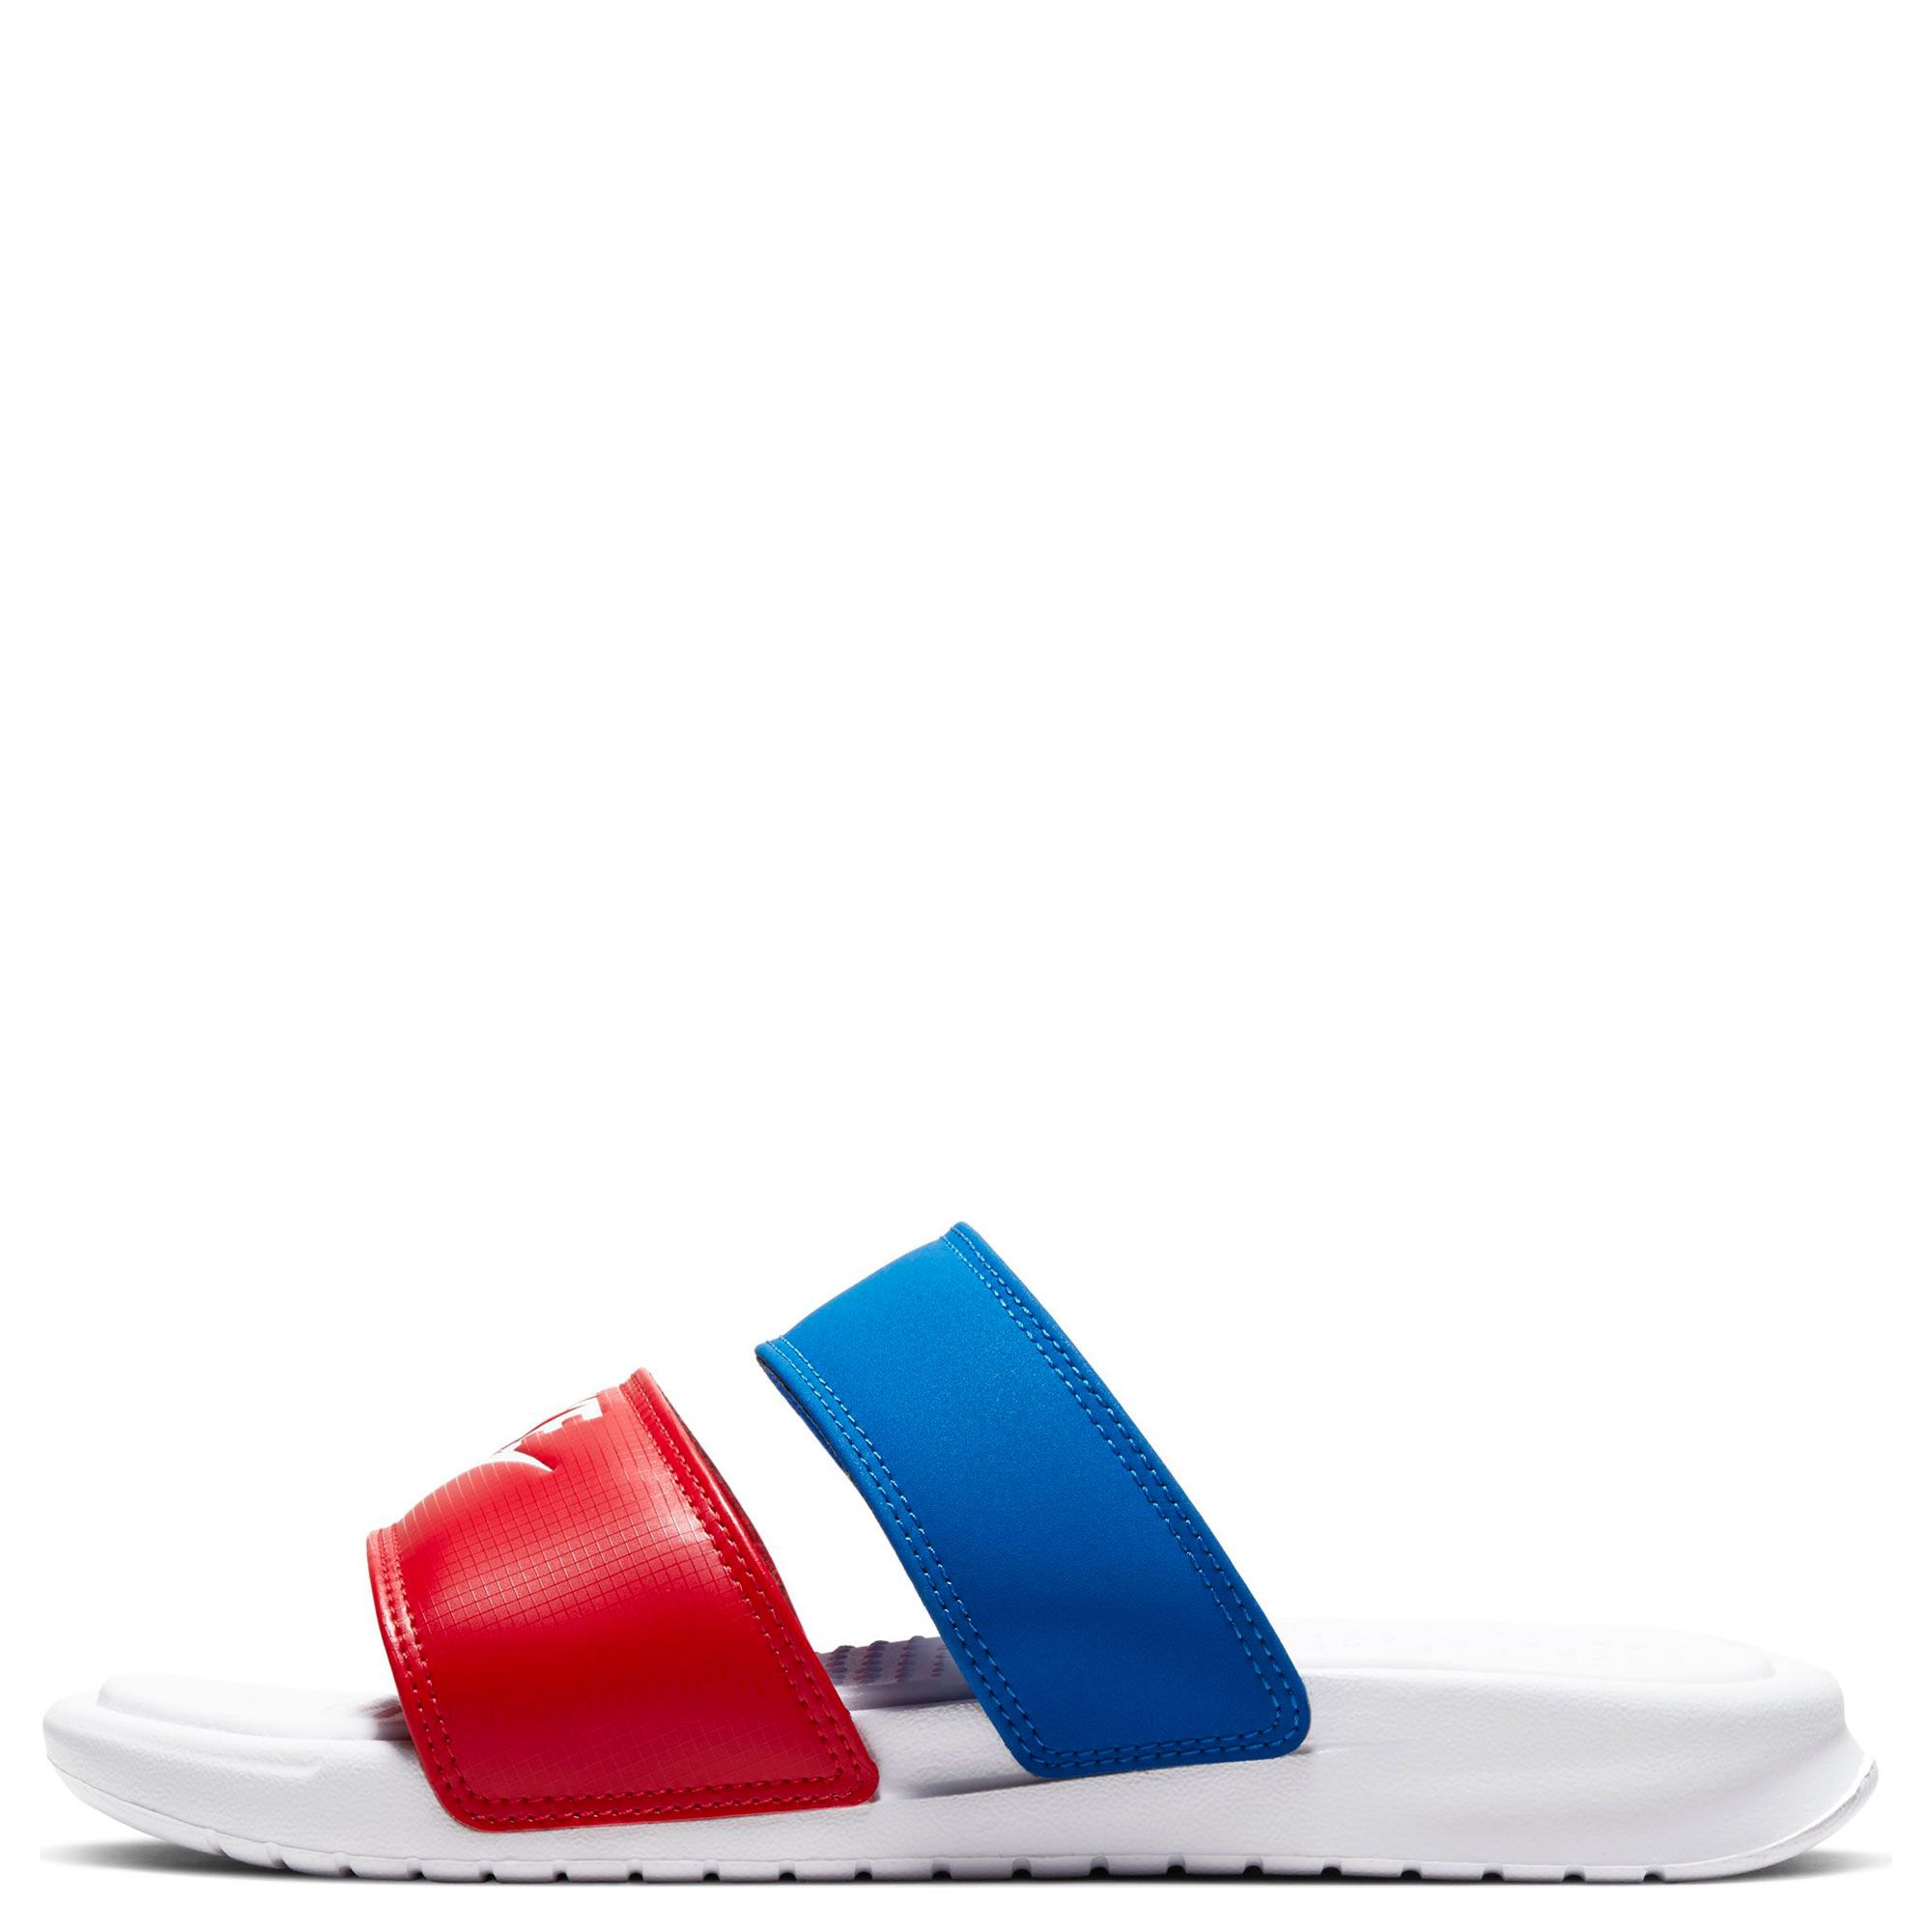 red nike slides double strap